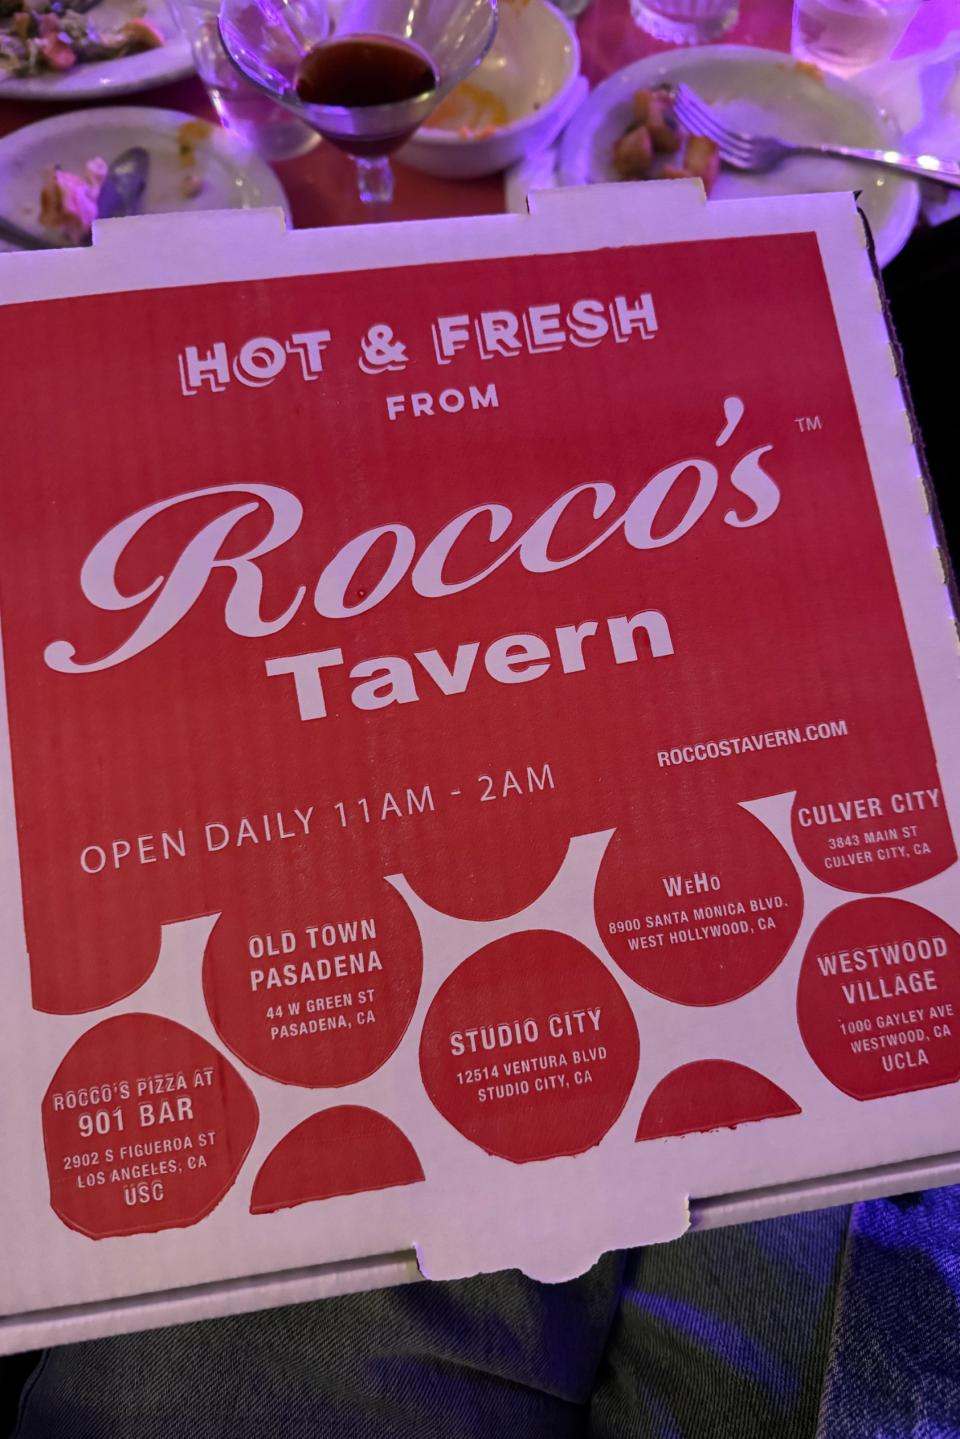 Menu cover for Rocco's Tavern, detailing locations and operating hours